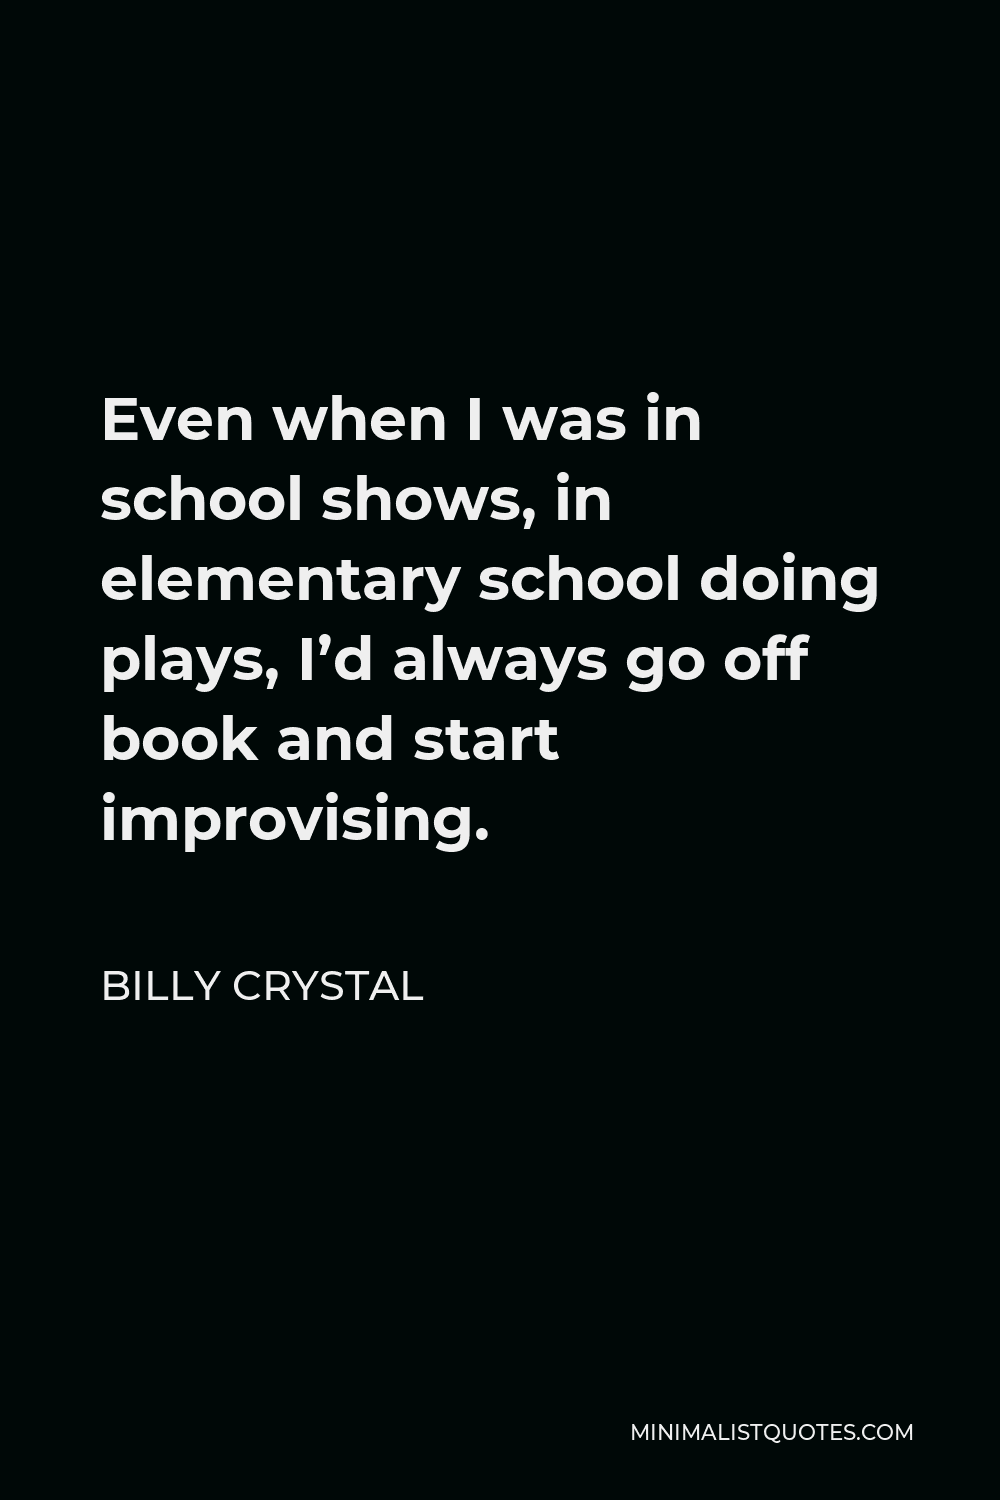 Billy Crystal Quote - Even when I was in school shows, in elementary school doing plays, I’d always go off book and start improvising.